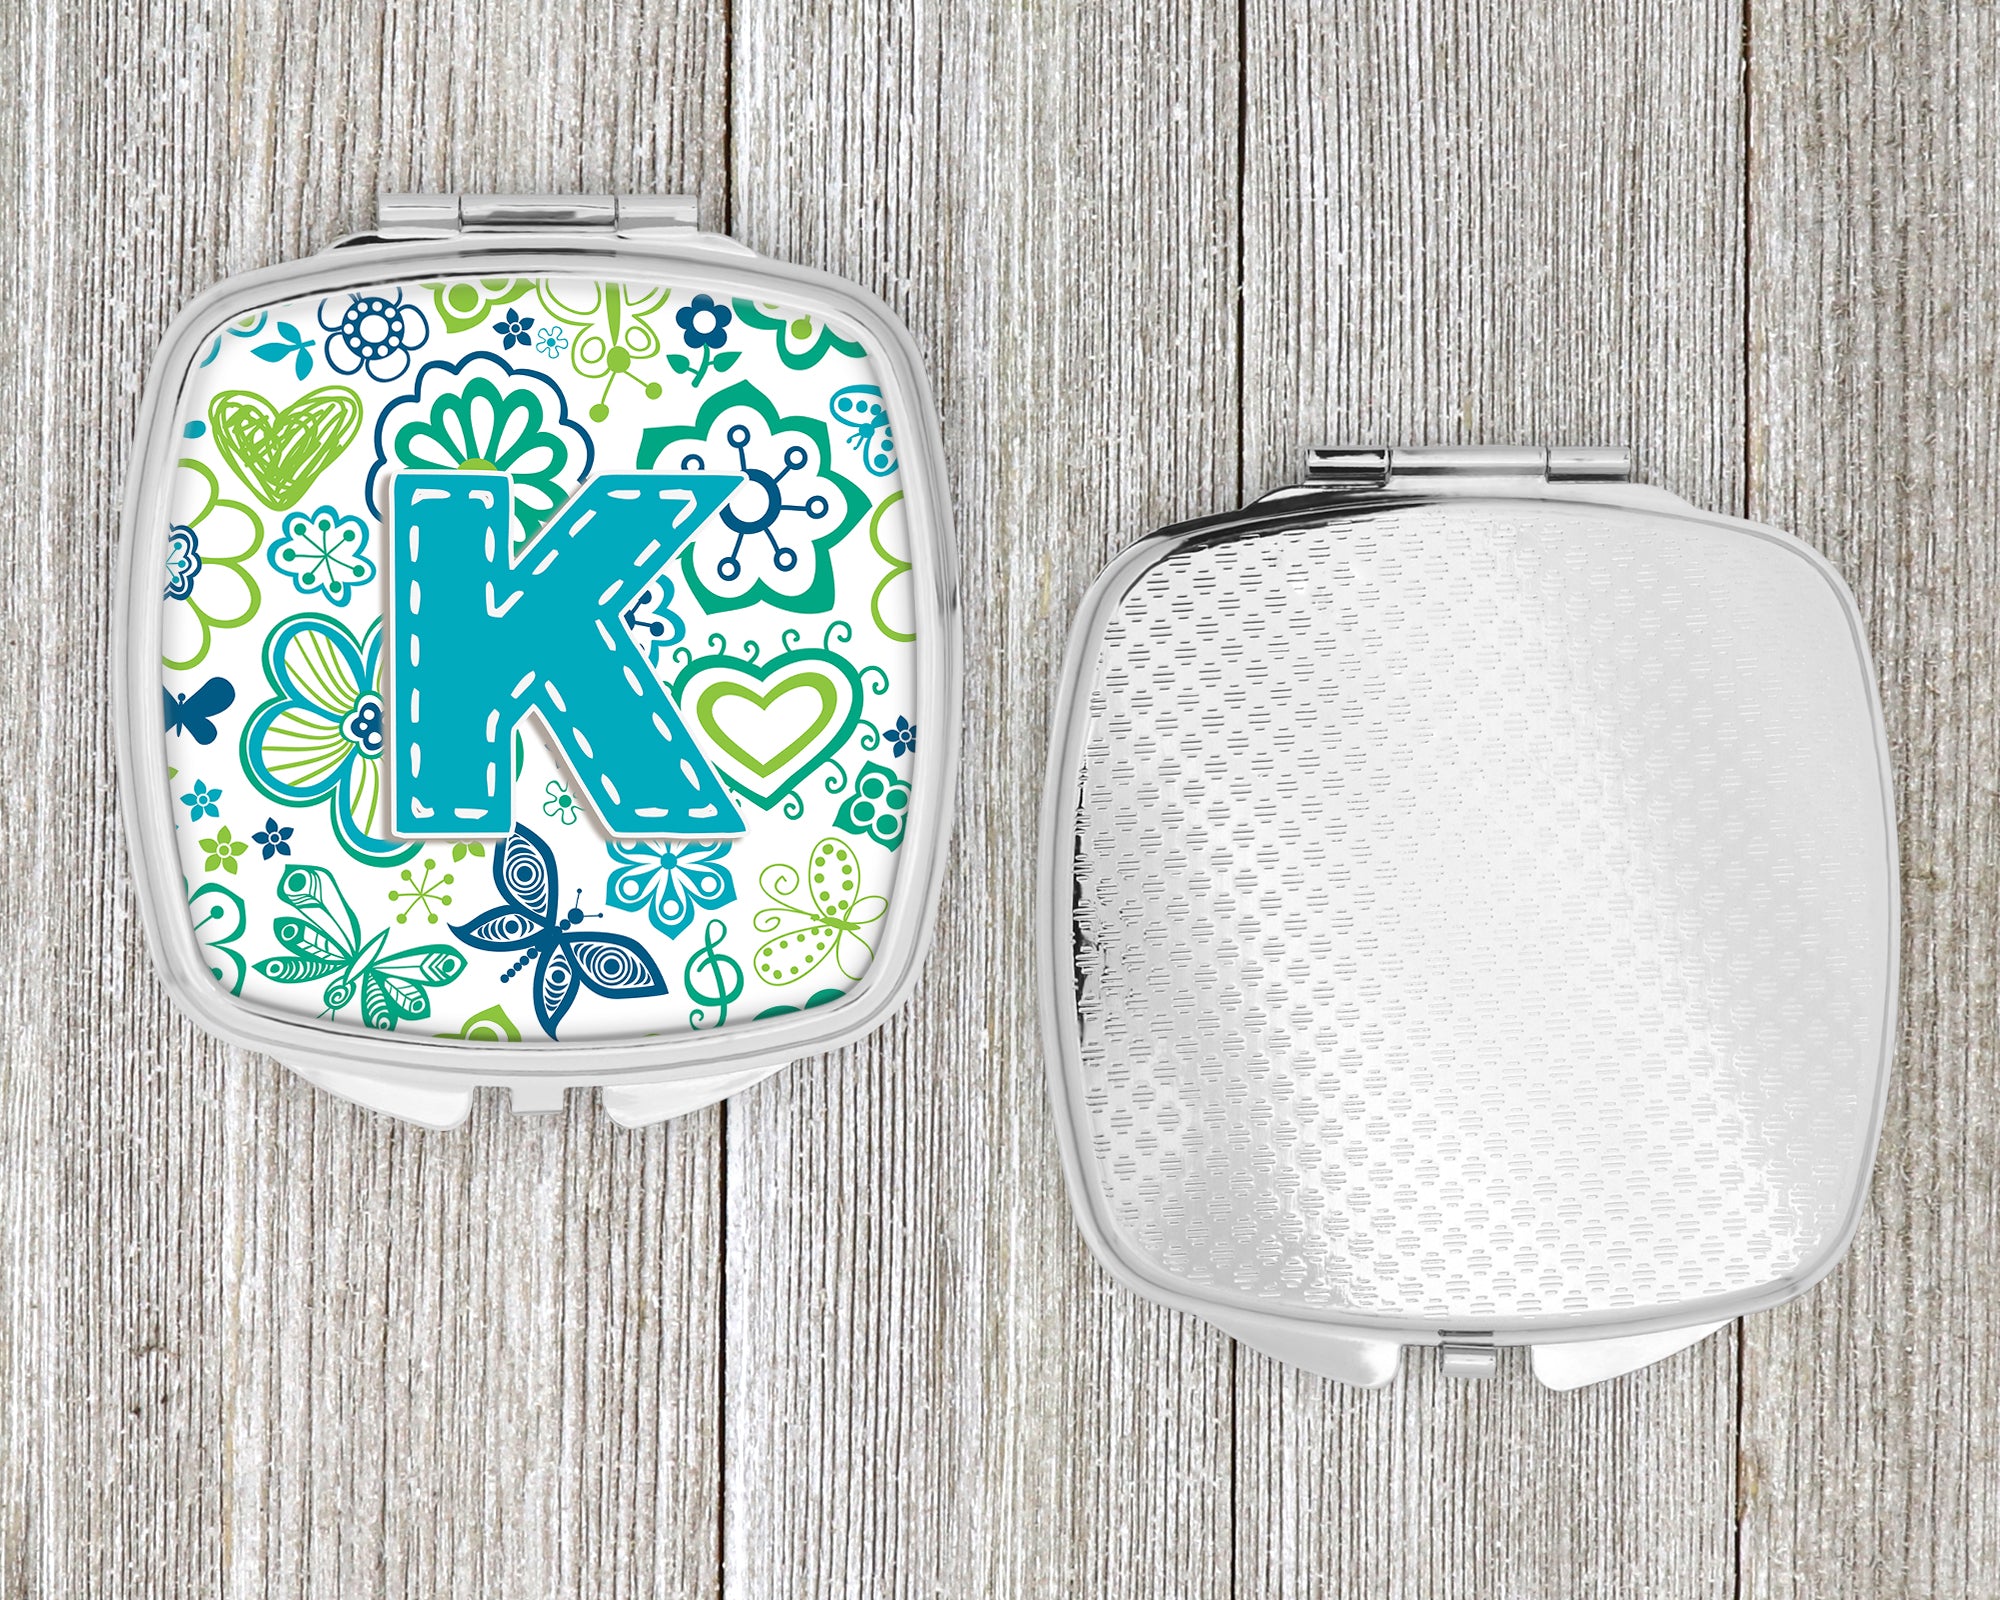 Letter K Flowers and Butterflies Teal Blue Compact Mirror CJ2006-KSCM  the-store.com.